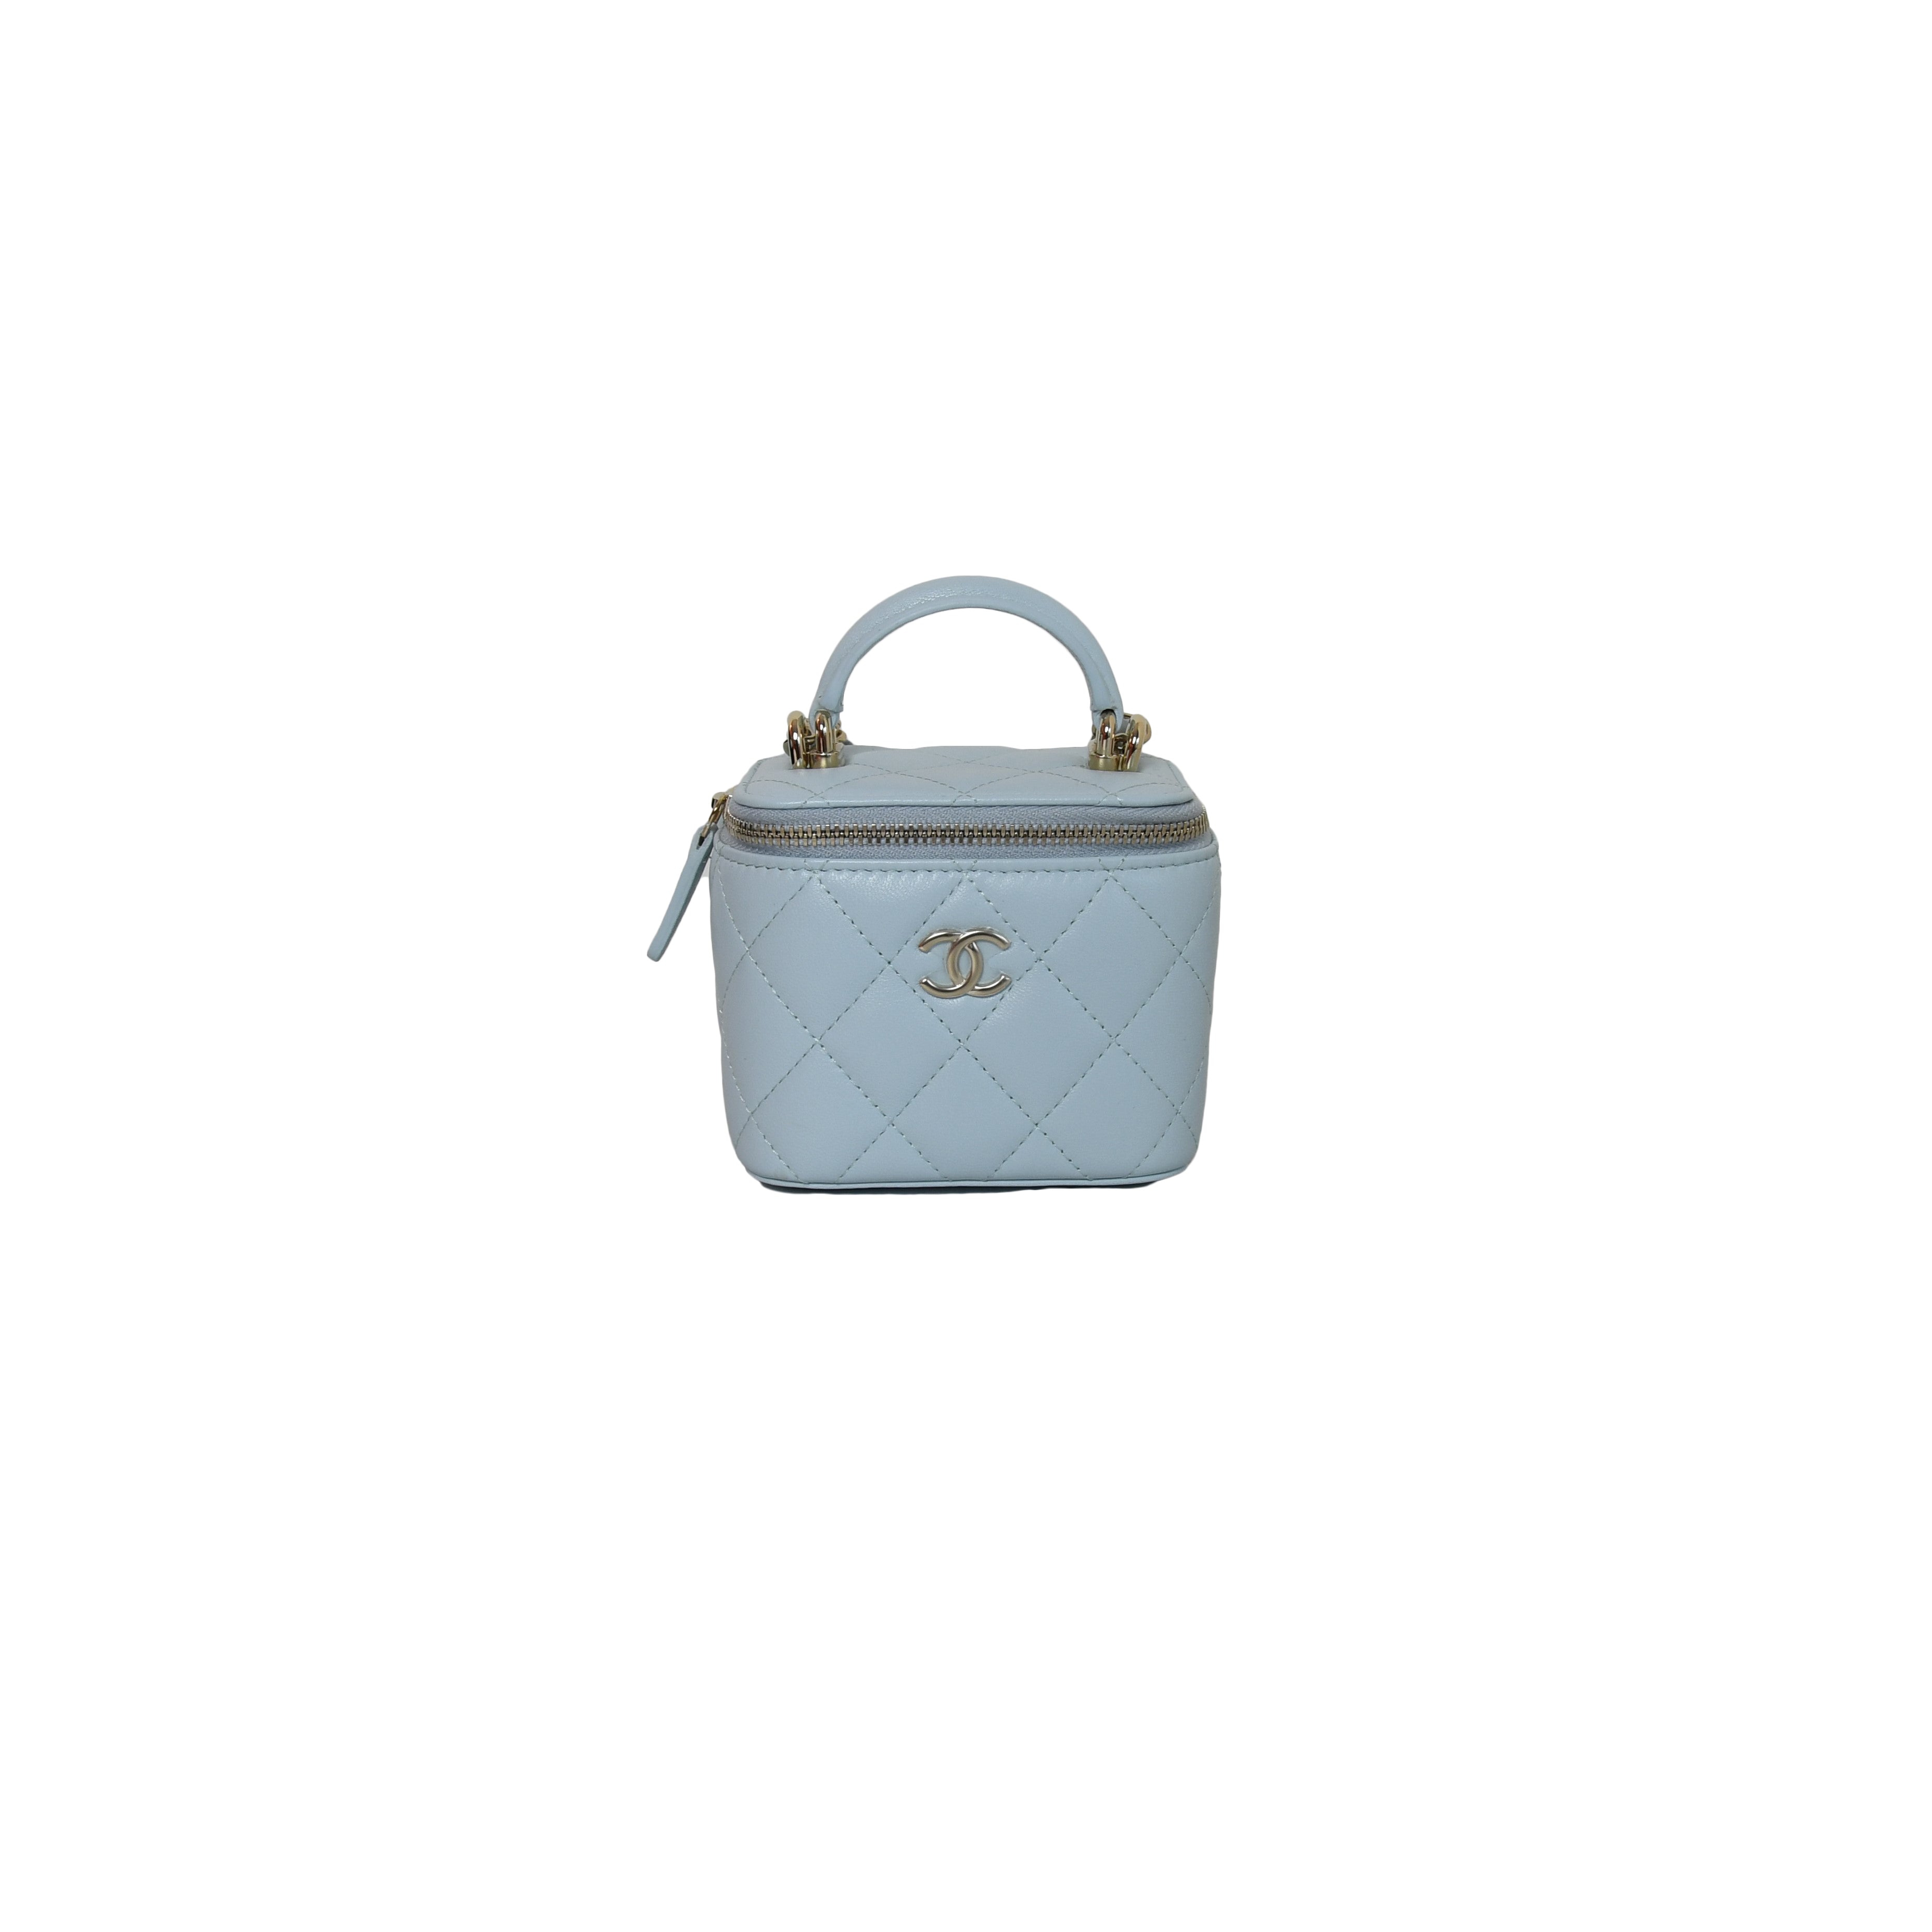 CHANEL, Bags, Chanel Baby Blue Small Vanity Case